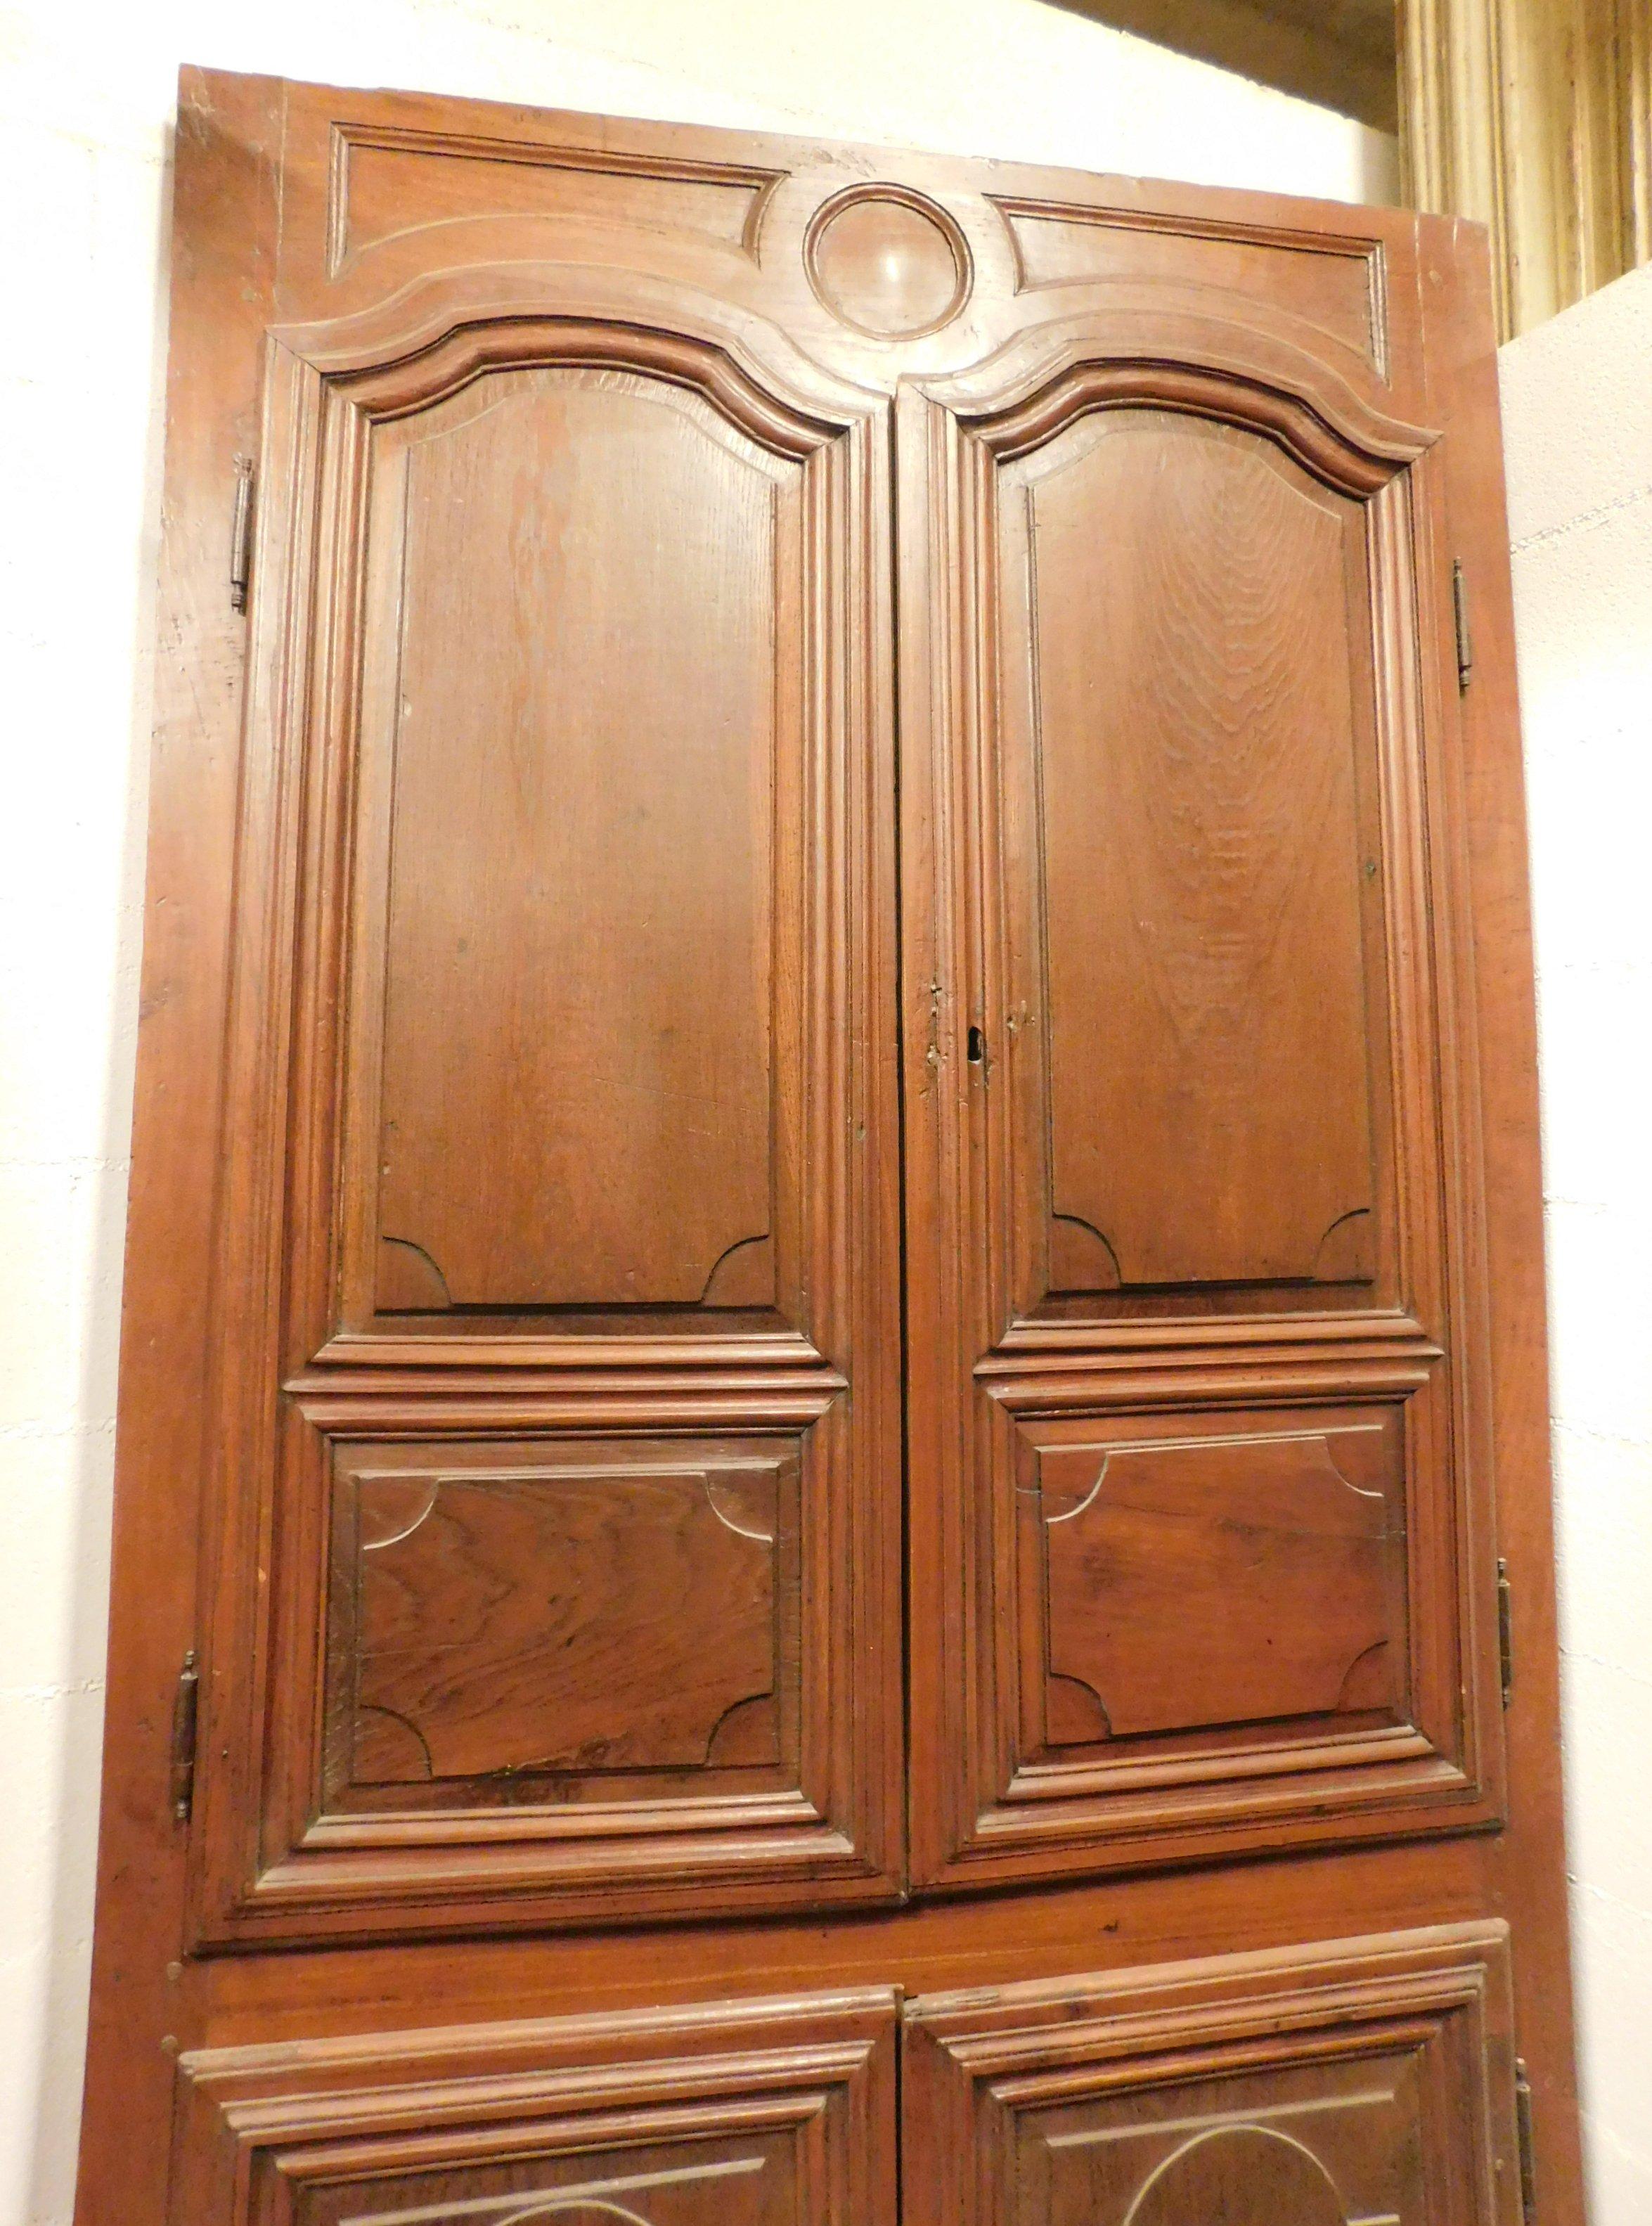 Italian Antique Wall Cabinet Door Placard Carved Walnut, Four Doors, 18th Century, Italy For Sale